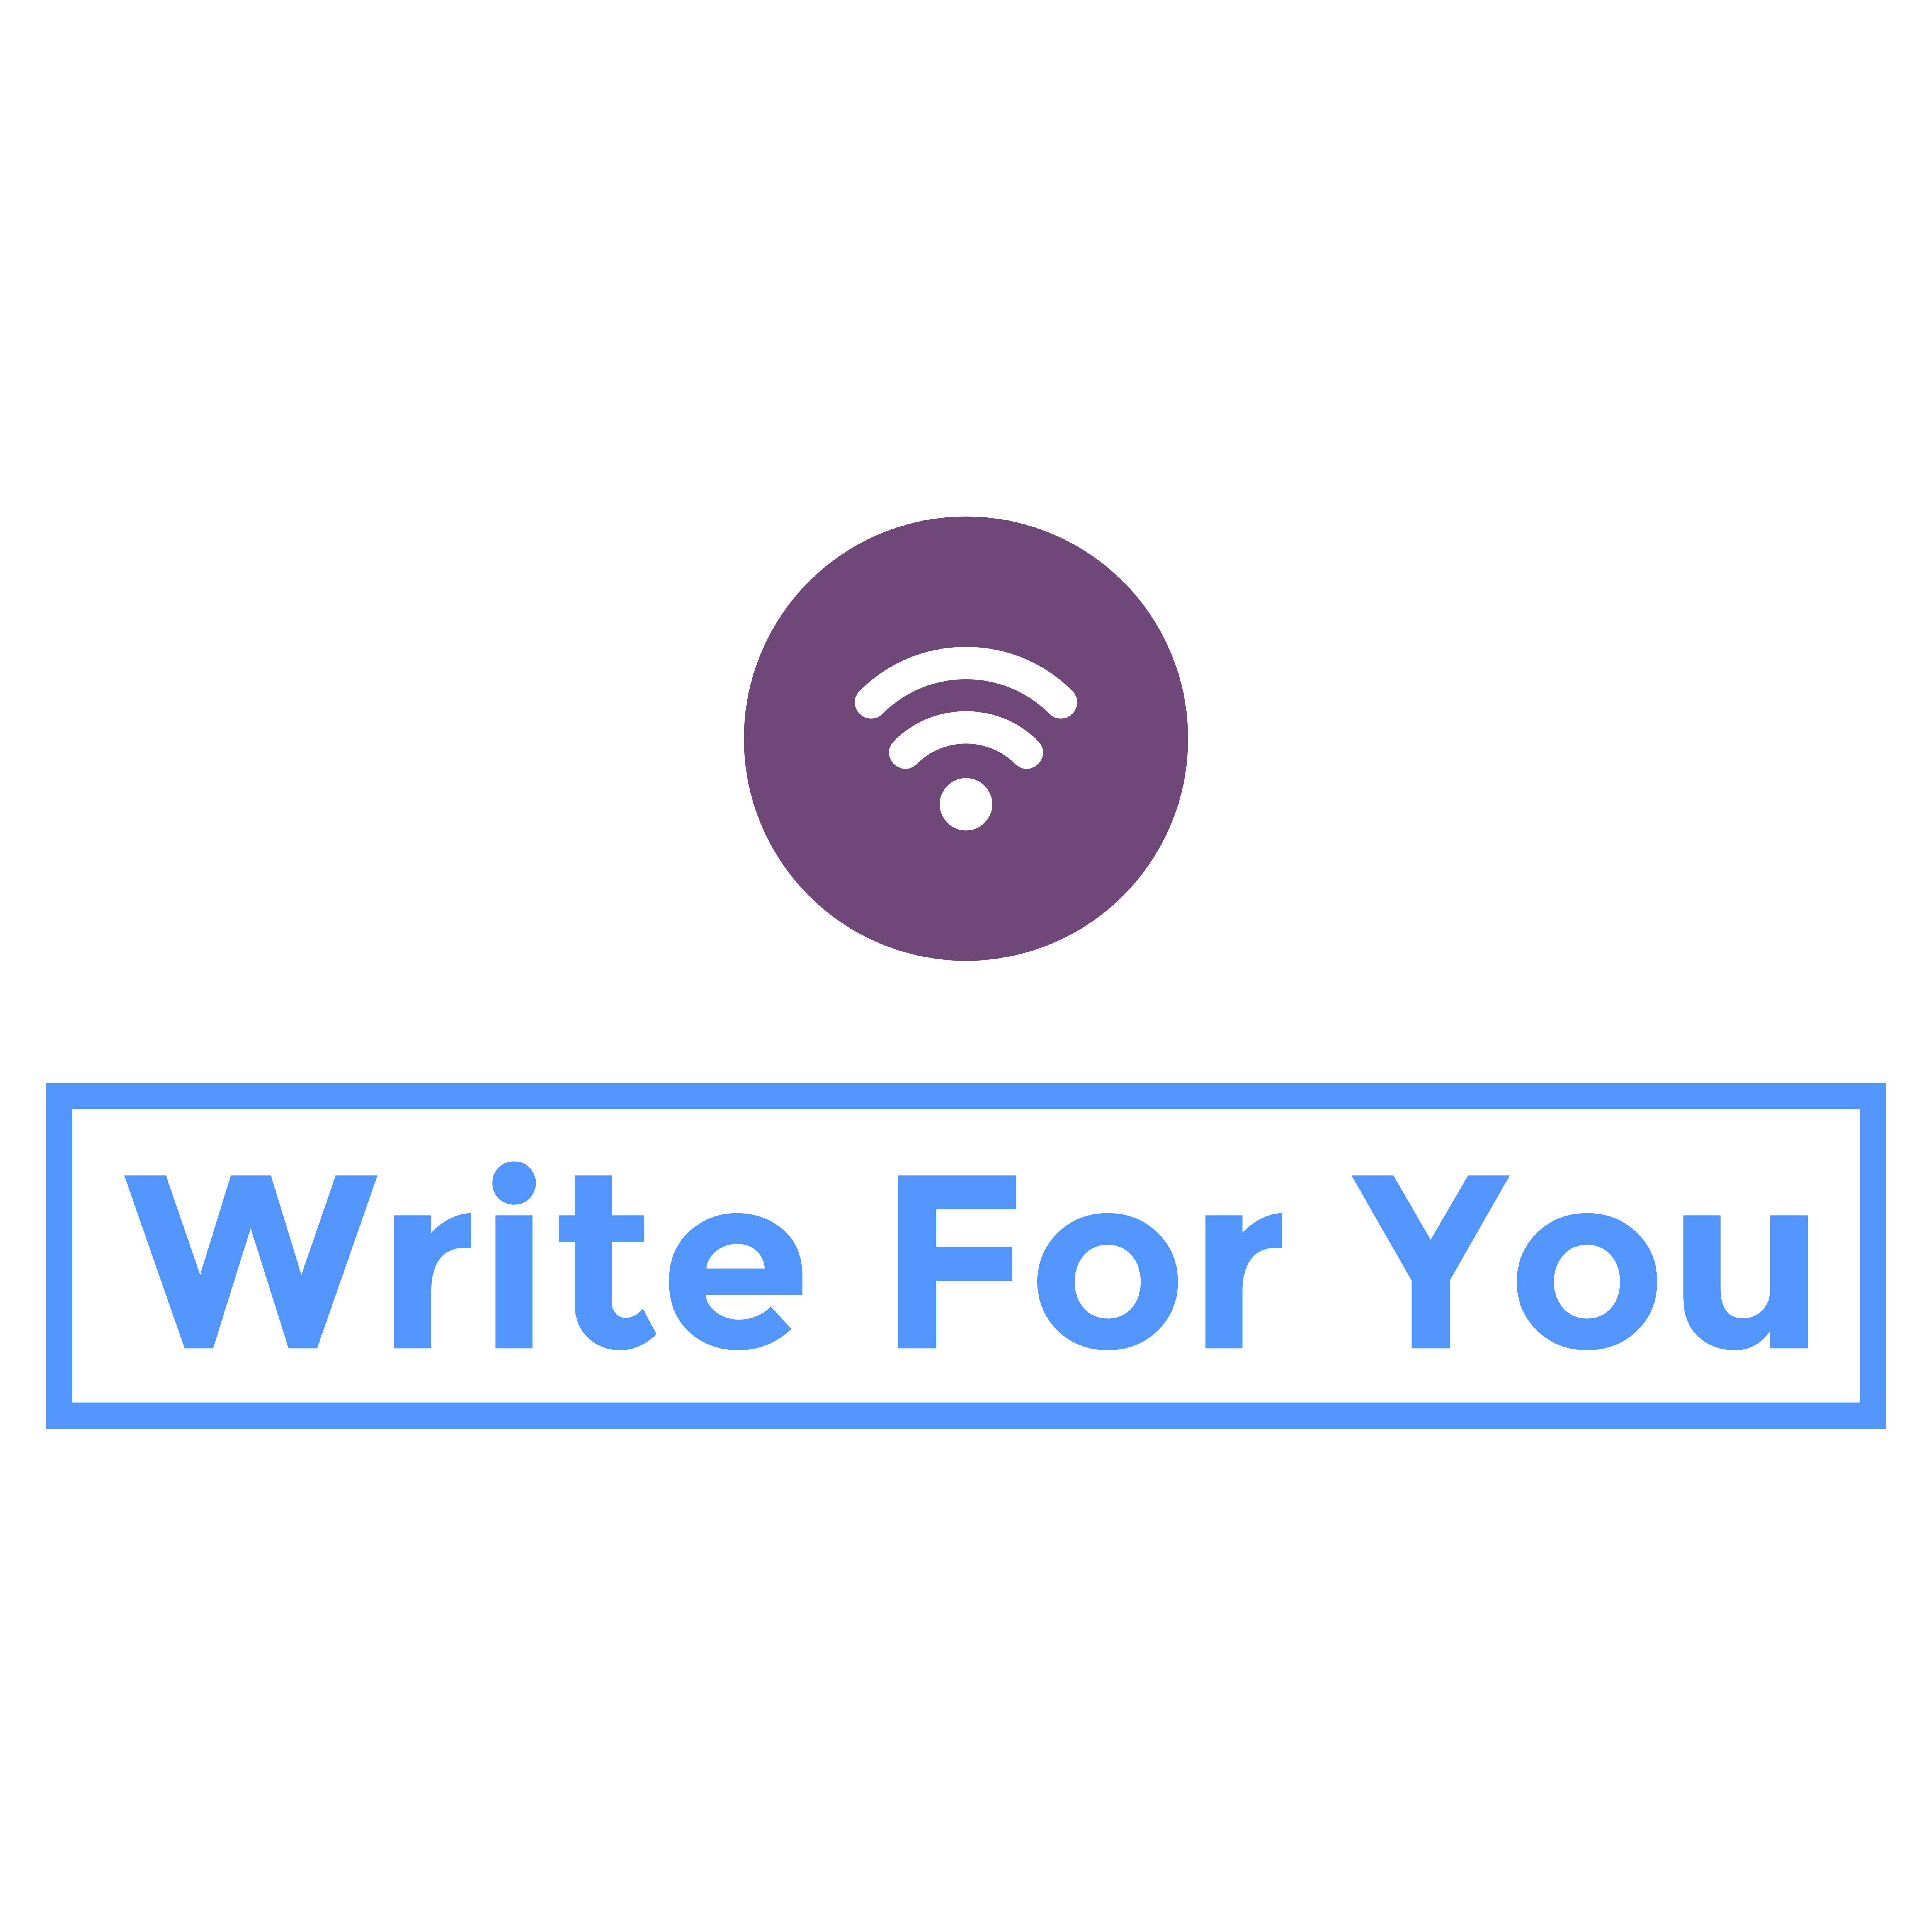 Write For You<br /><br />Web content provider Call: 07824167196